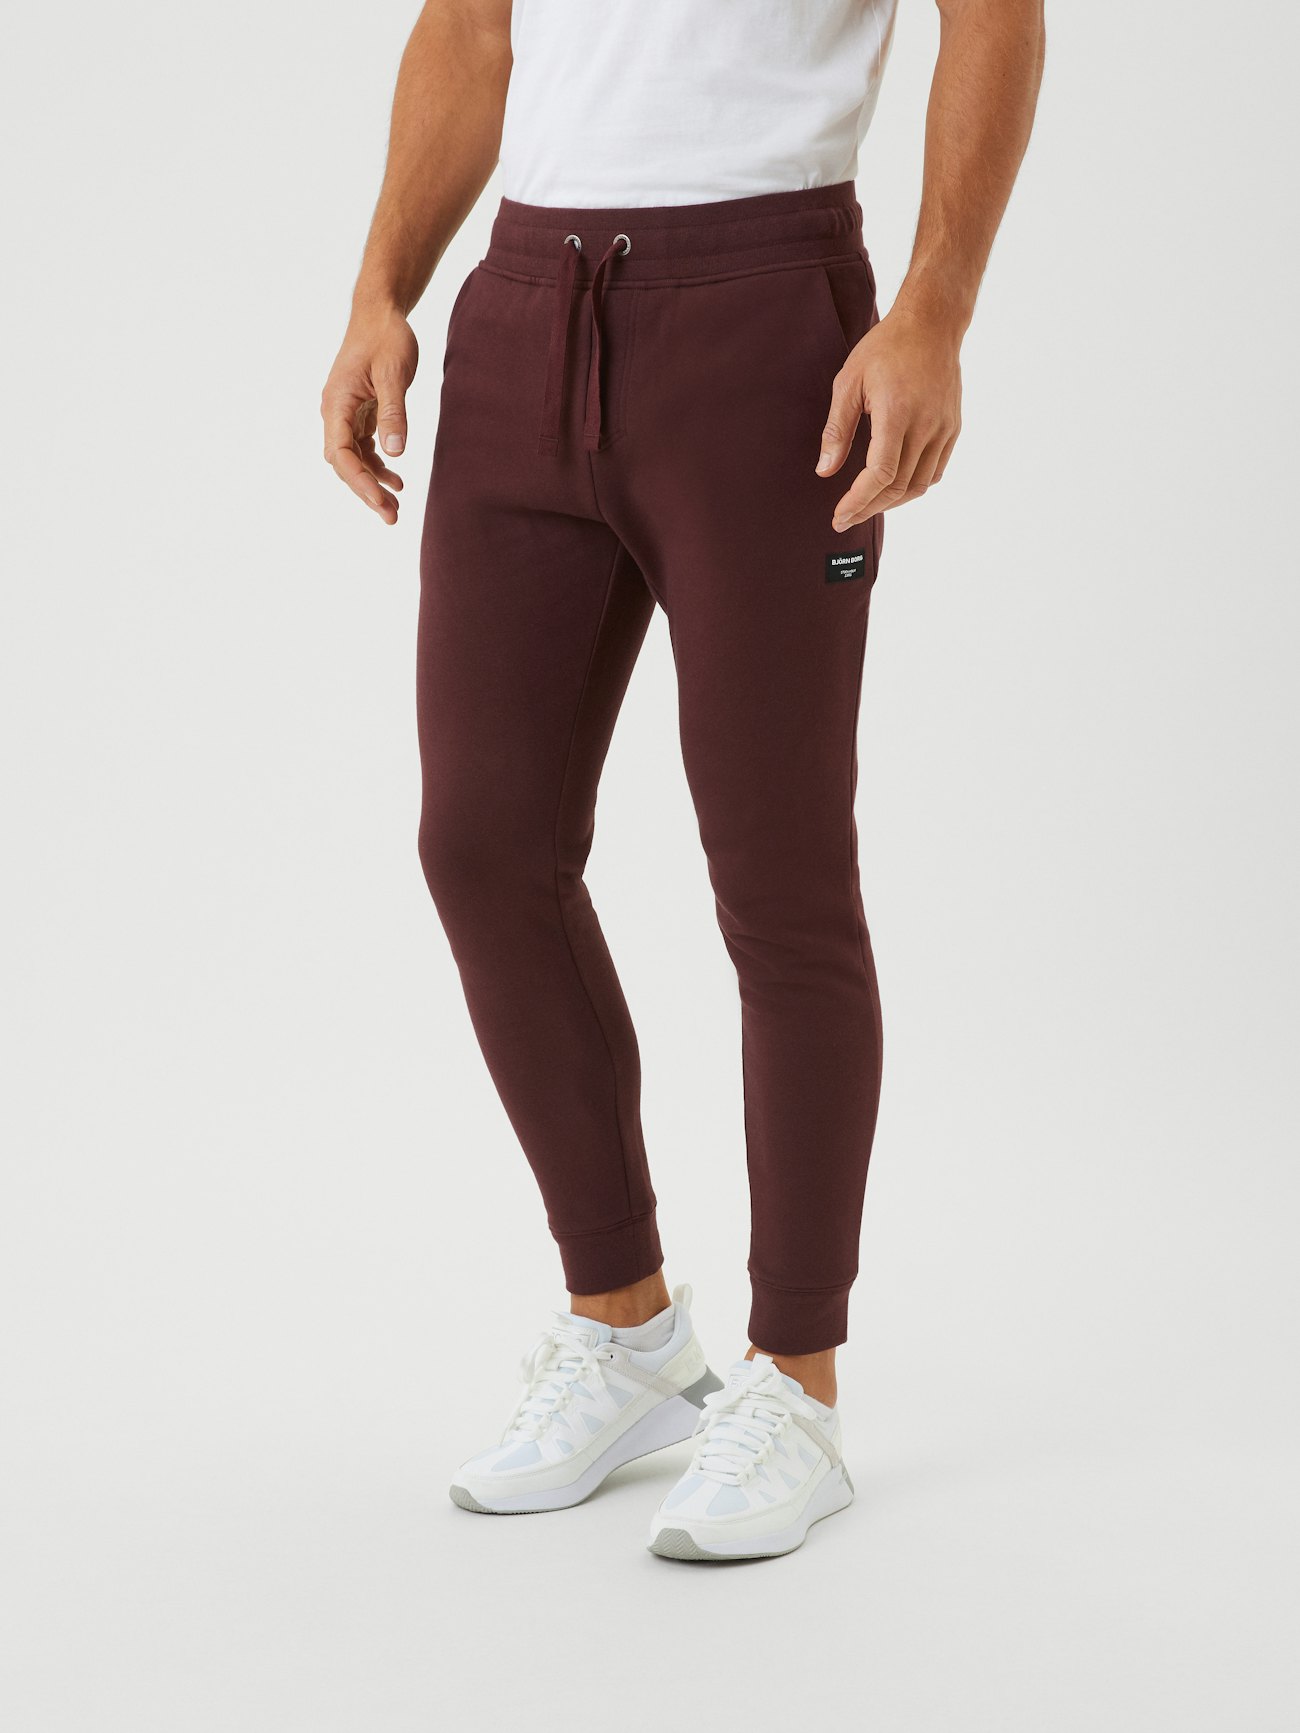 Centre Tapered Pants - Decadent Chocolate | Björn Borg